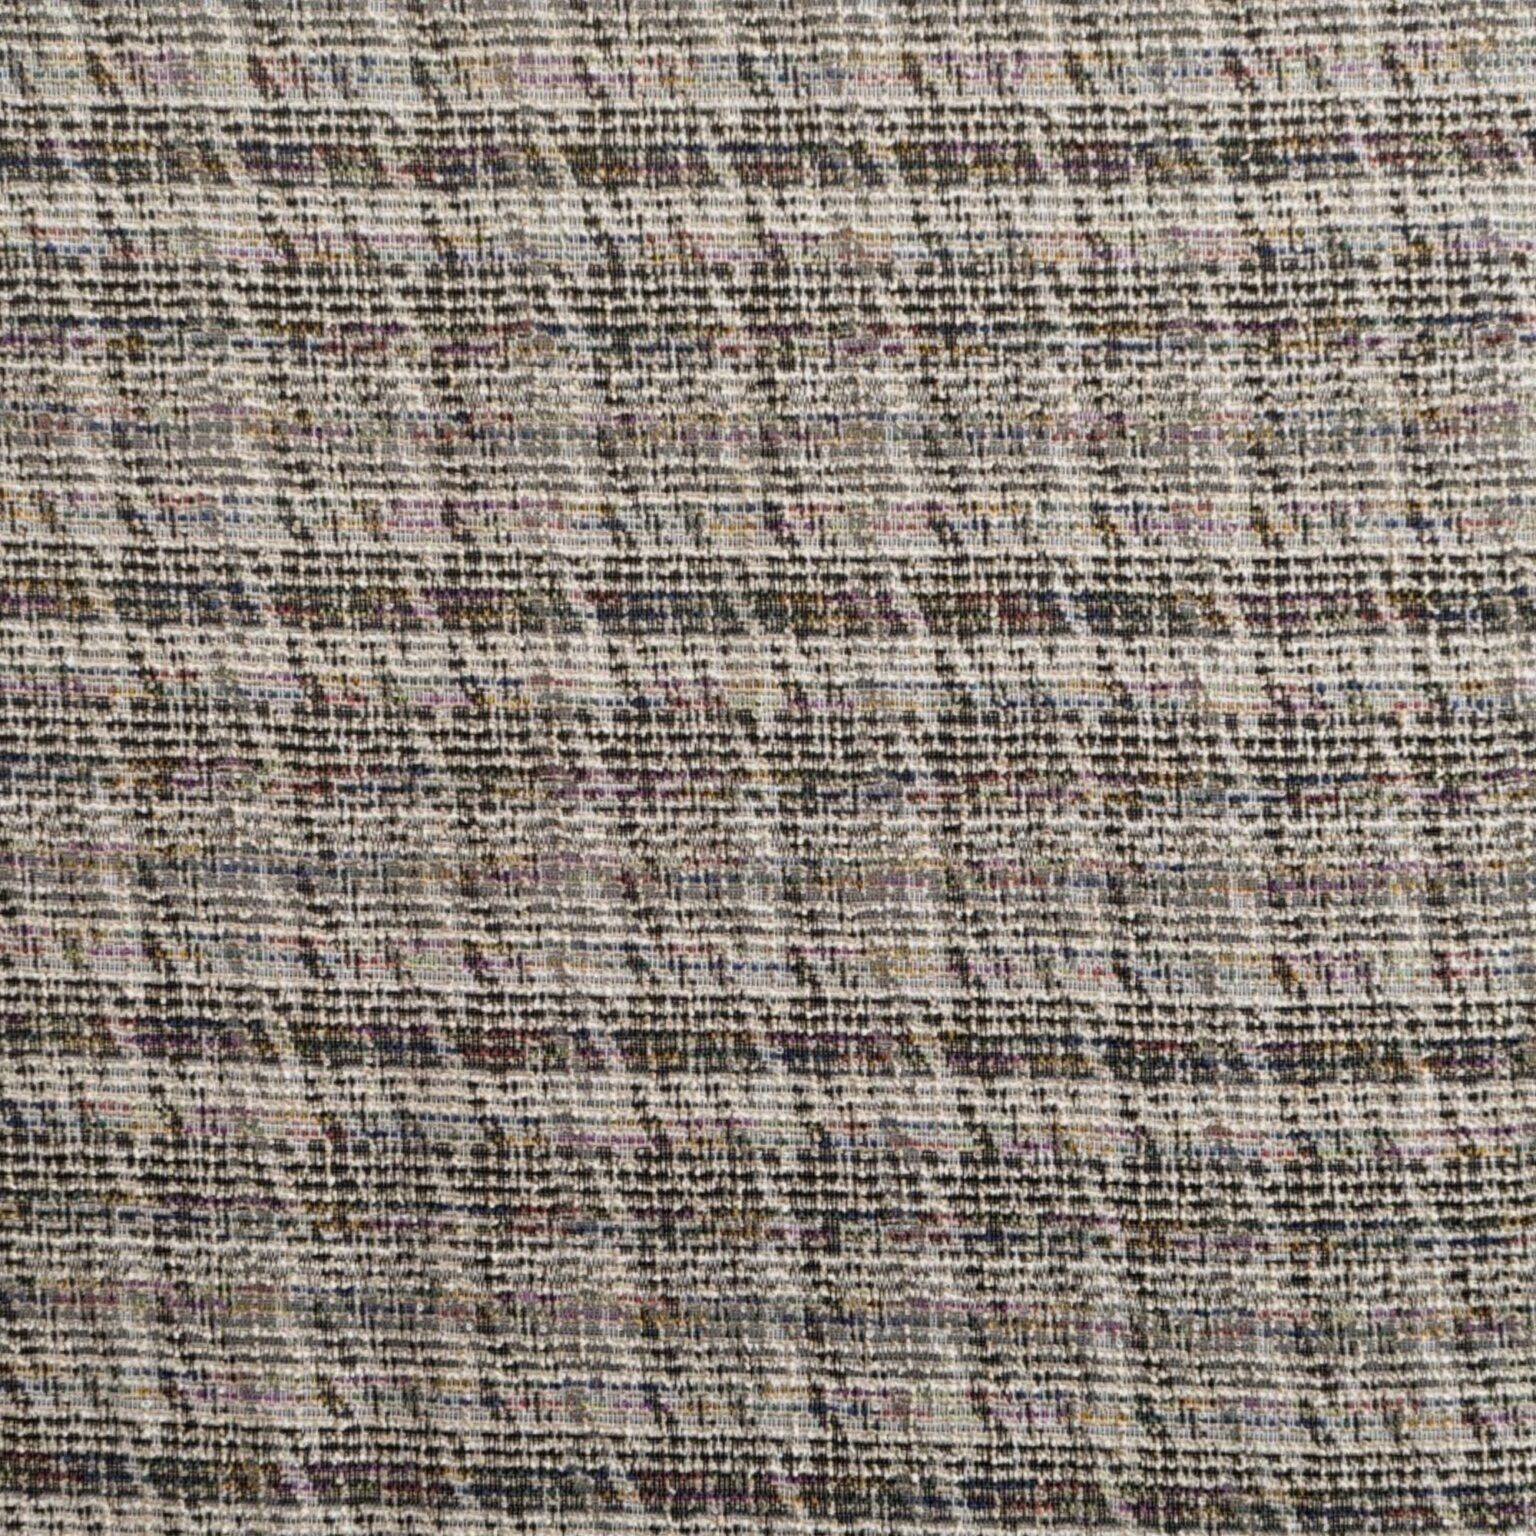 Knitted Boucle Fabric - Designer Check - 150cm Wide